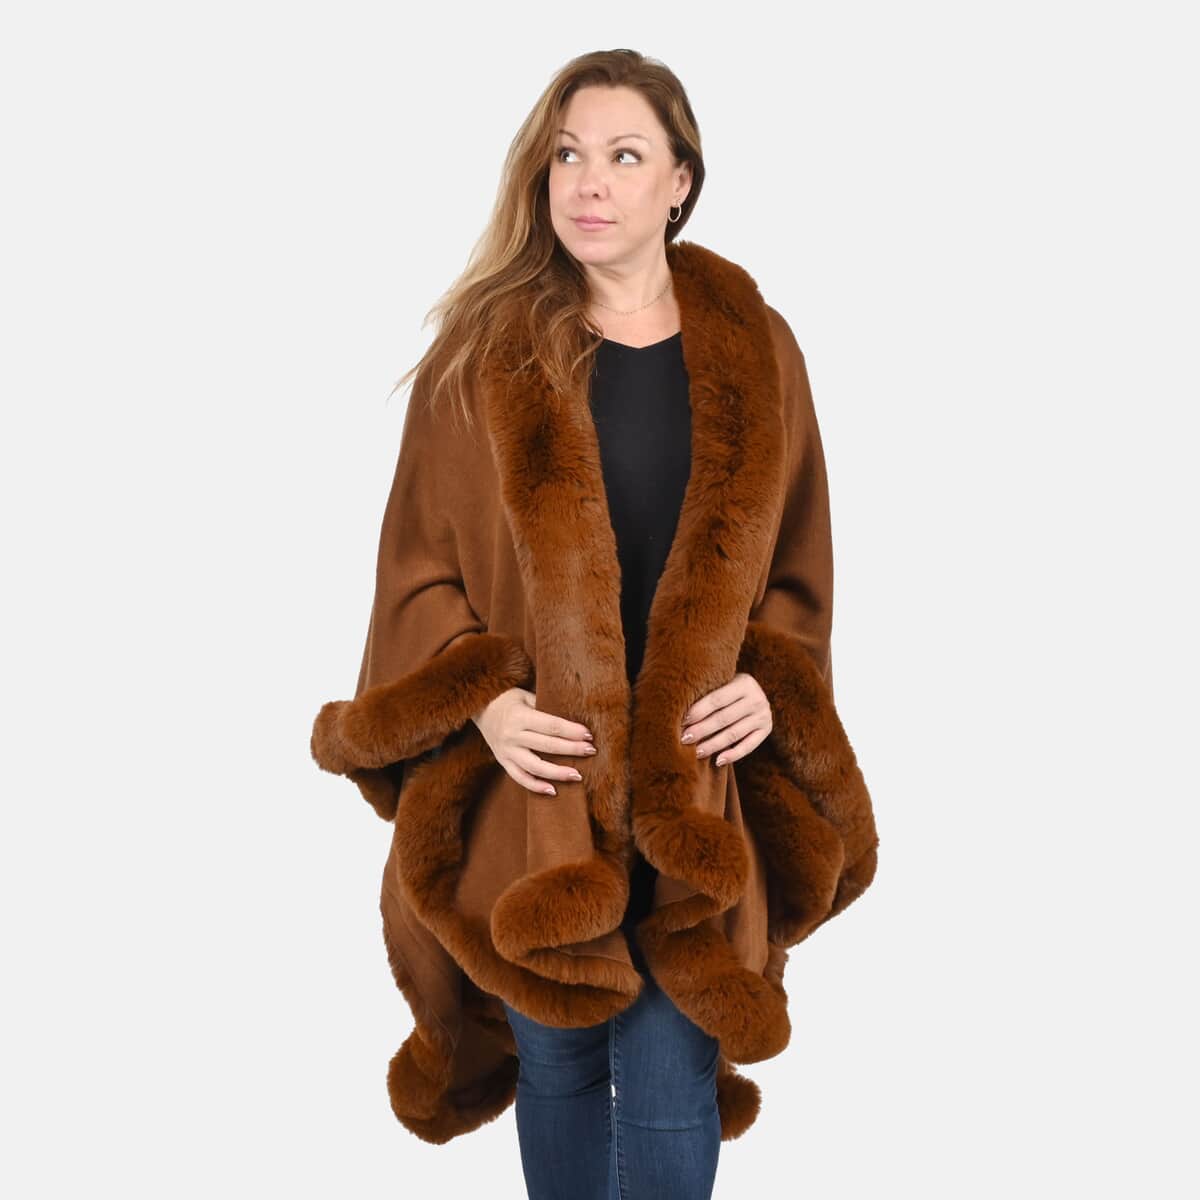 Tamsy Cognac Ruana with Faux Fur Trim - One Size Fits Most image number 3